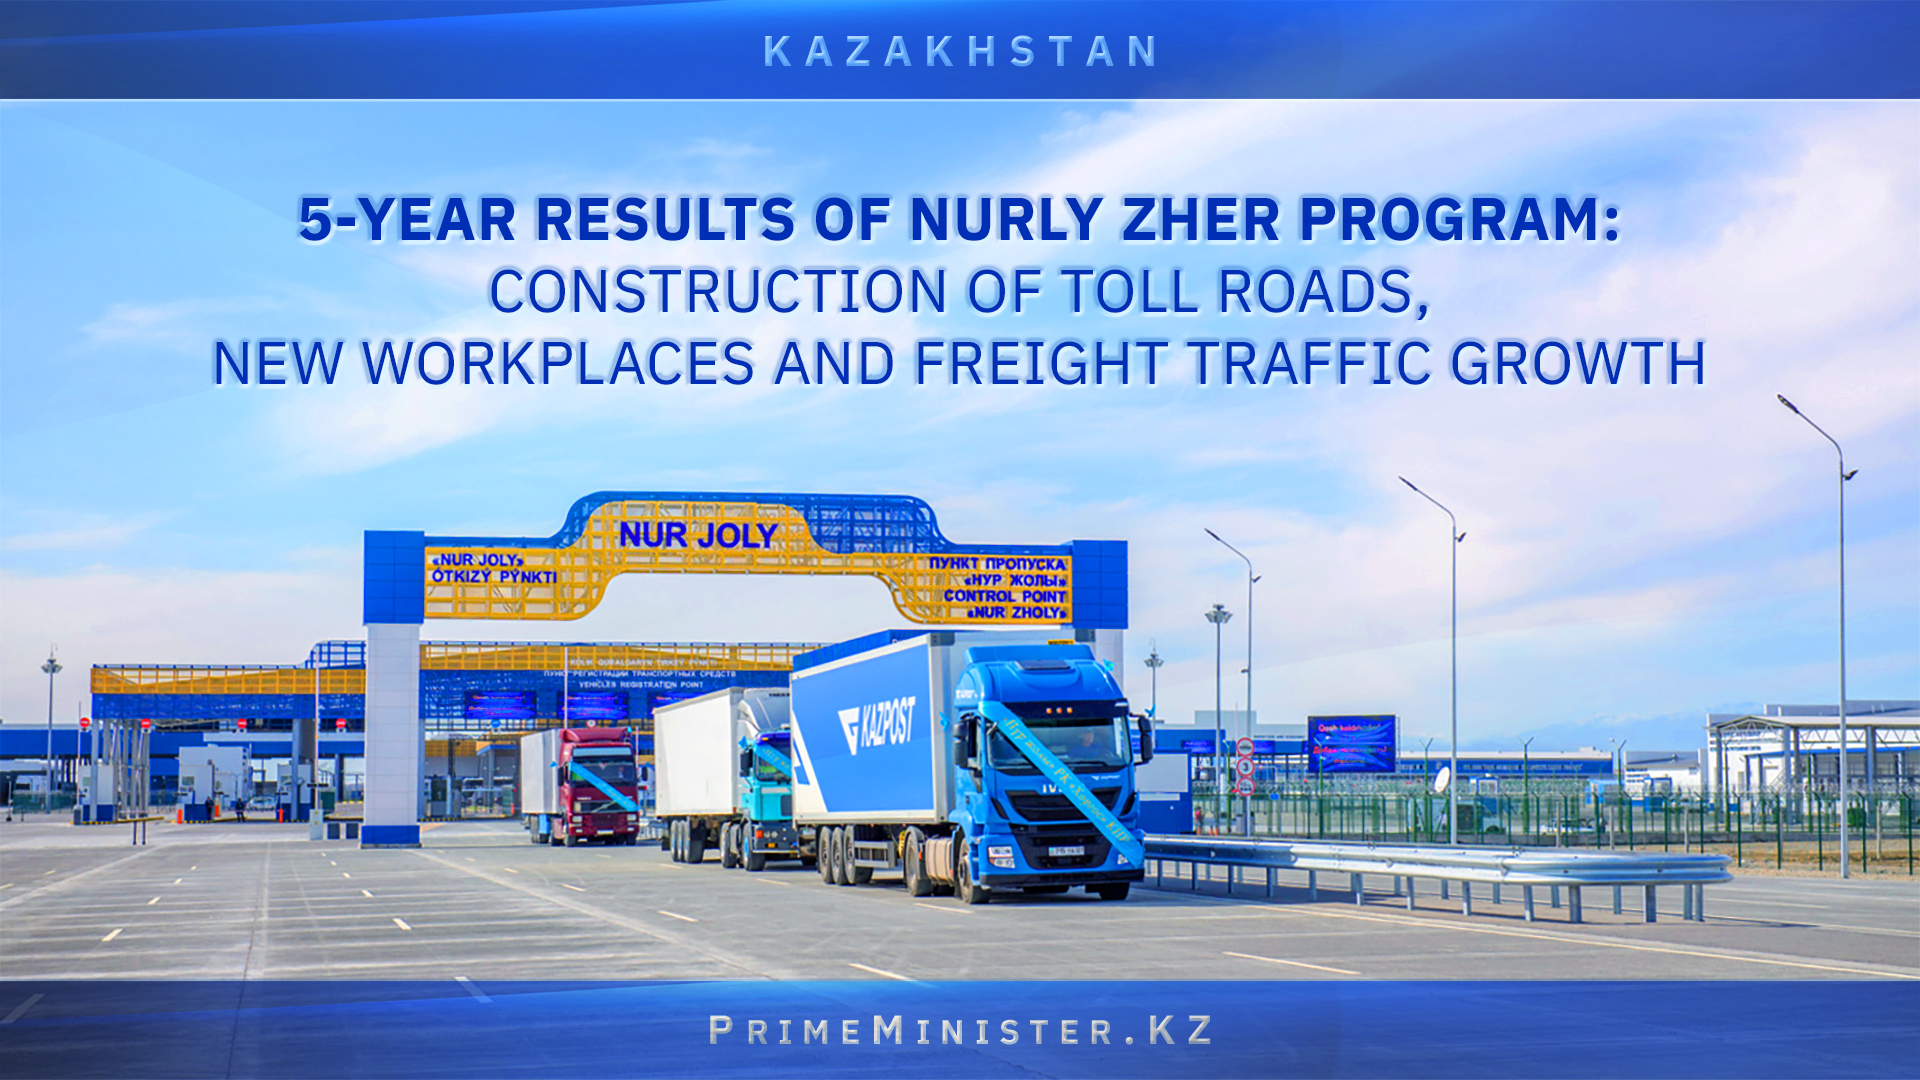 Five-year results of Nurly Zhol program: Construction of toll roads, creation of new jobs and freight traffic growth